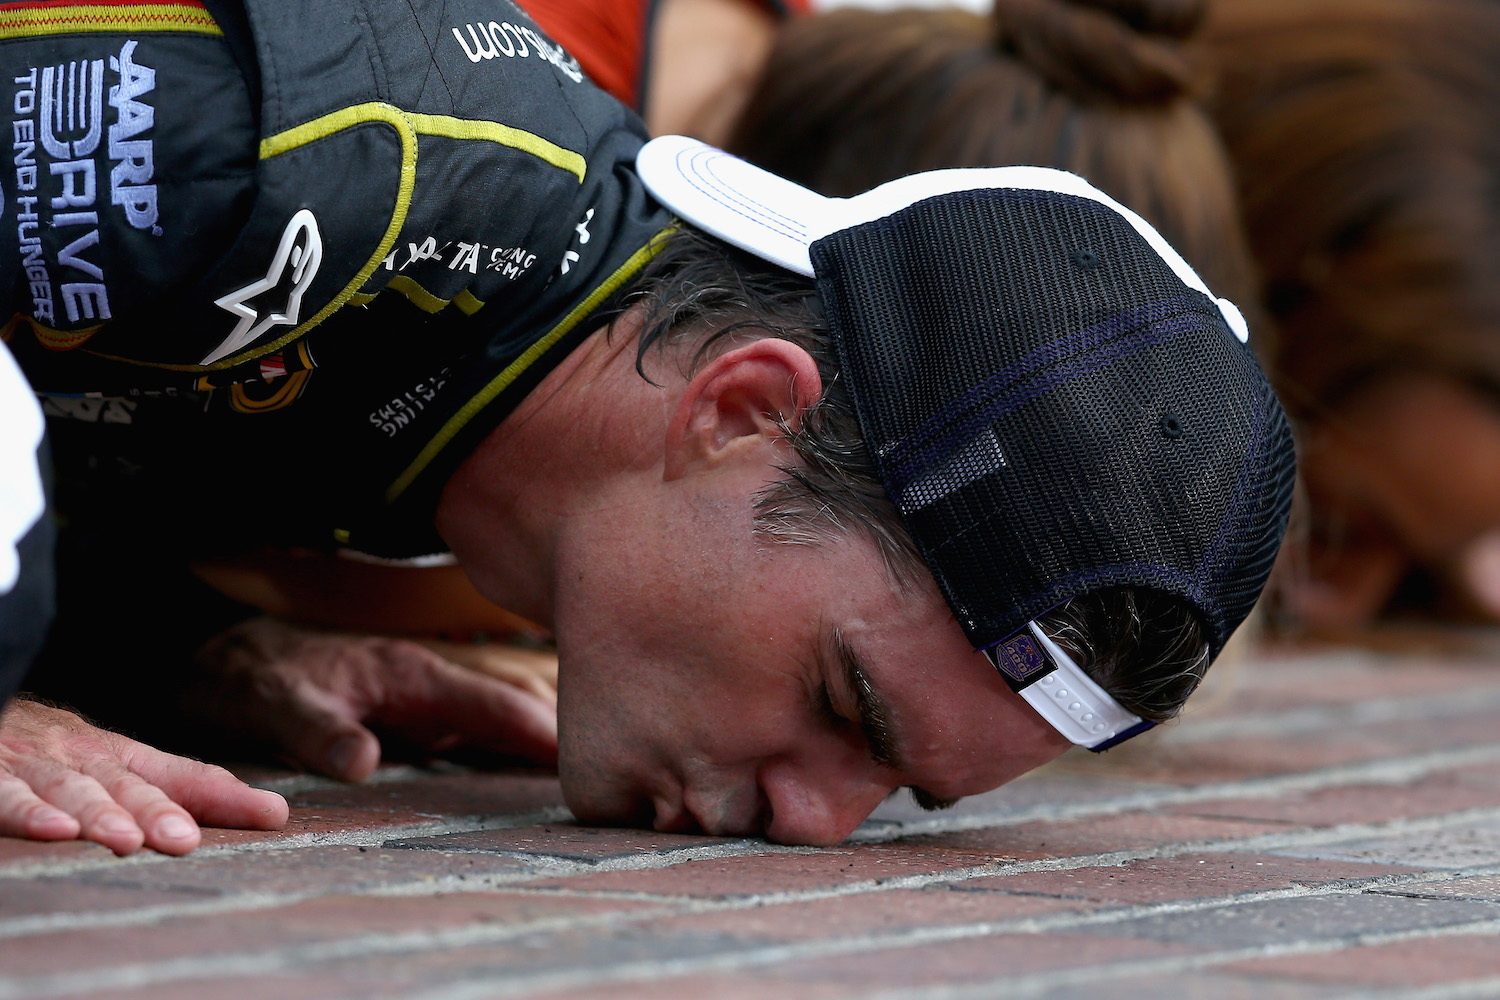 What NASCAR Driver Has the Most Brickyard 400 Wins?